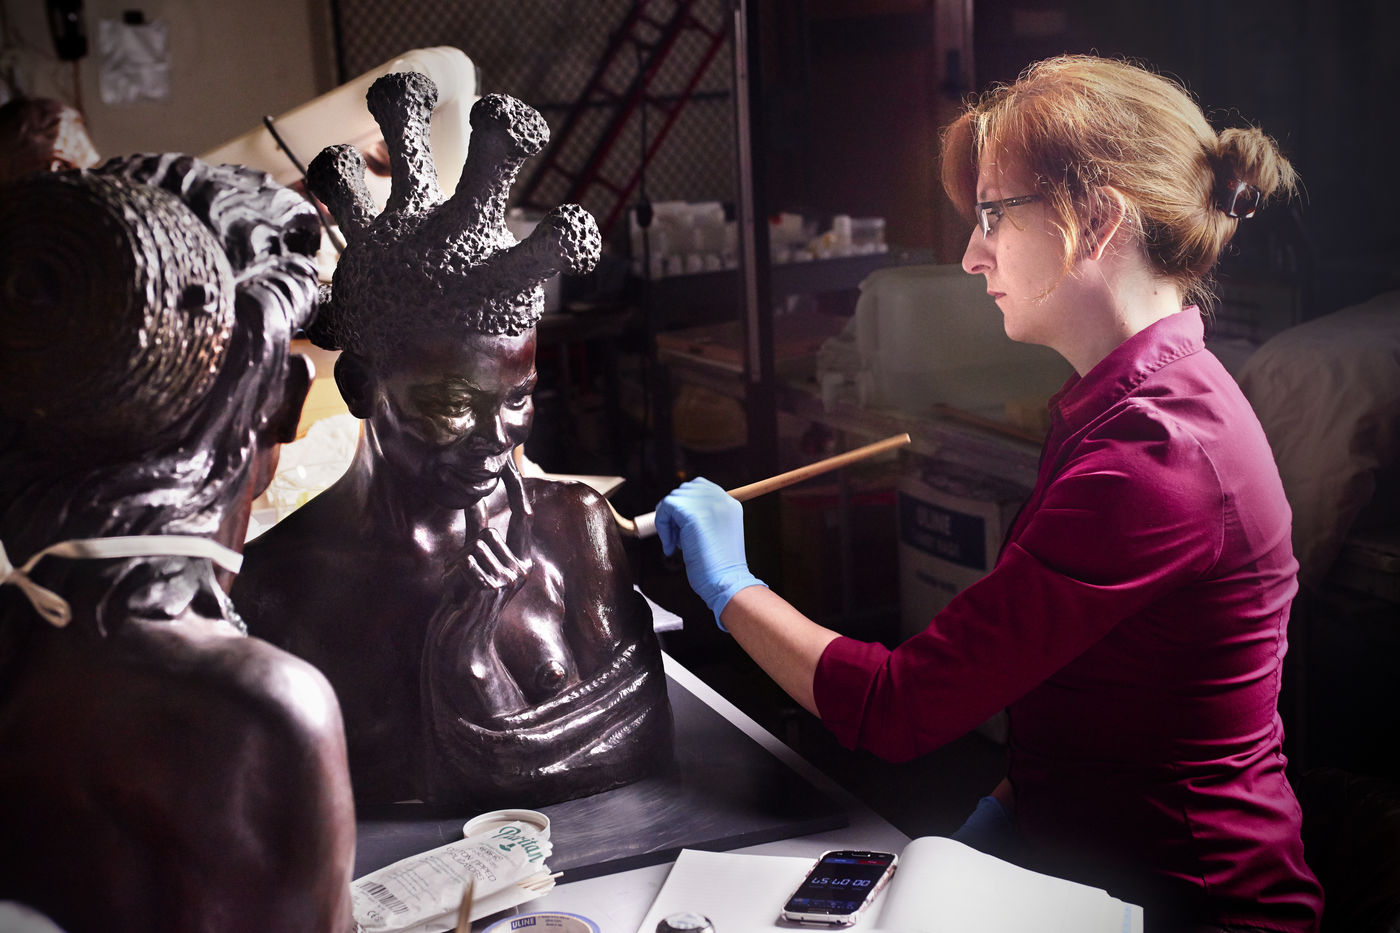 Conservation Assistant Allison Cassidy treats a bust portraying a woman from Sudan, created by artist Malvina Hoffman.